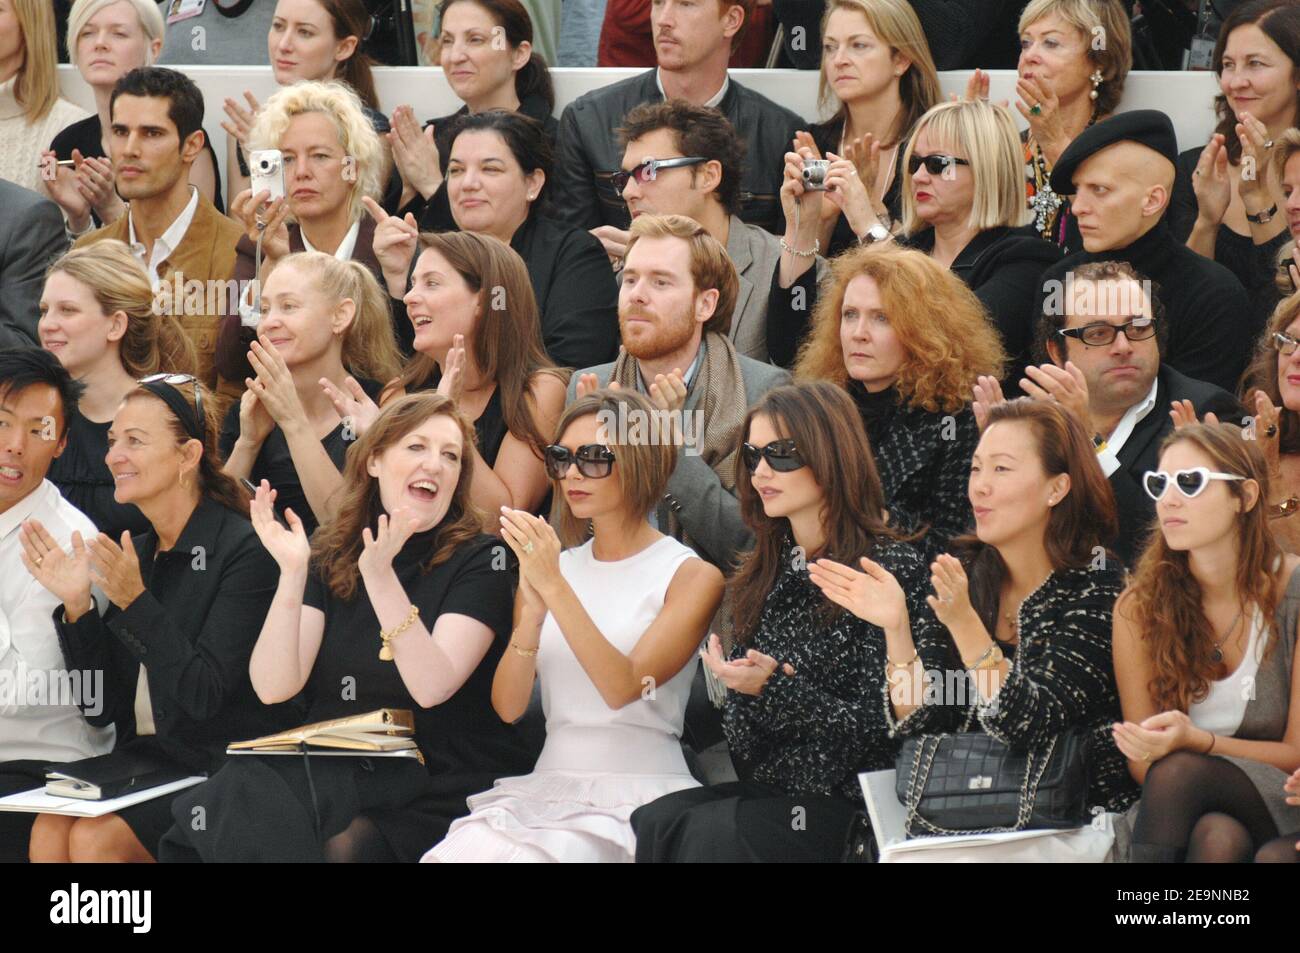 Victoria Beckham attends the presentation of the Chanel Spring-Summer 2007  Ready-to-Wear collection in the Grand Palais in Paris, France on October 6,  2006. Photo by Khayat-Nebinger-Orban-Tamallah/ABACAPRESS.COM Stock Photo -  Alamy